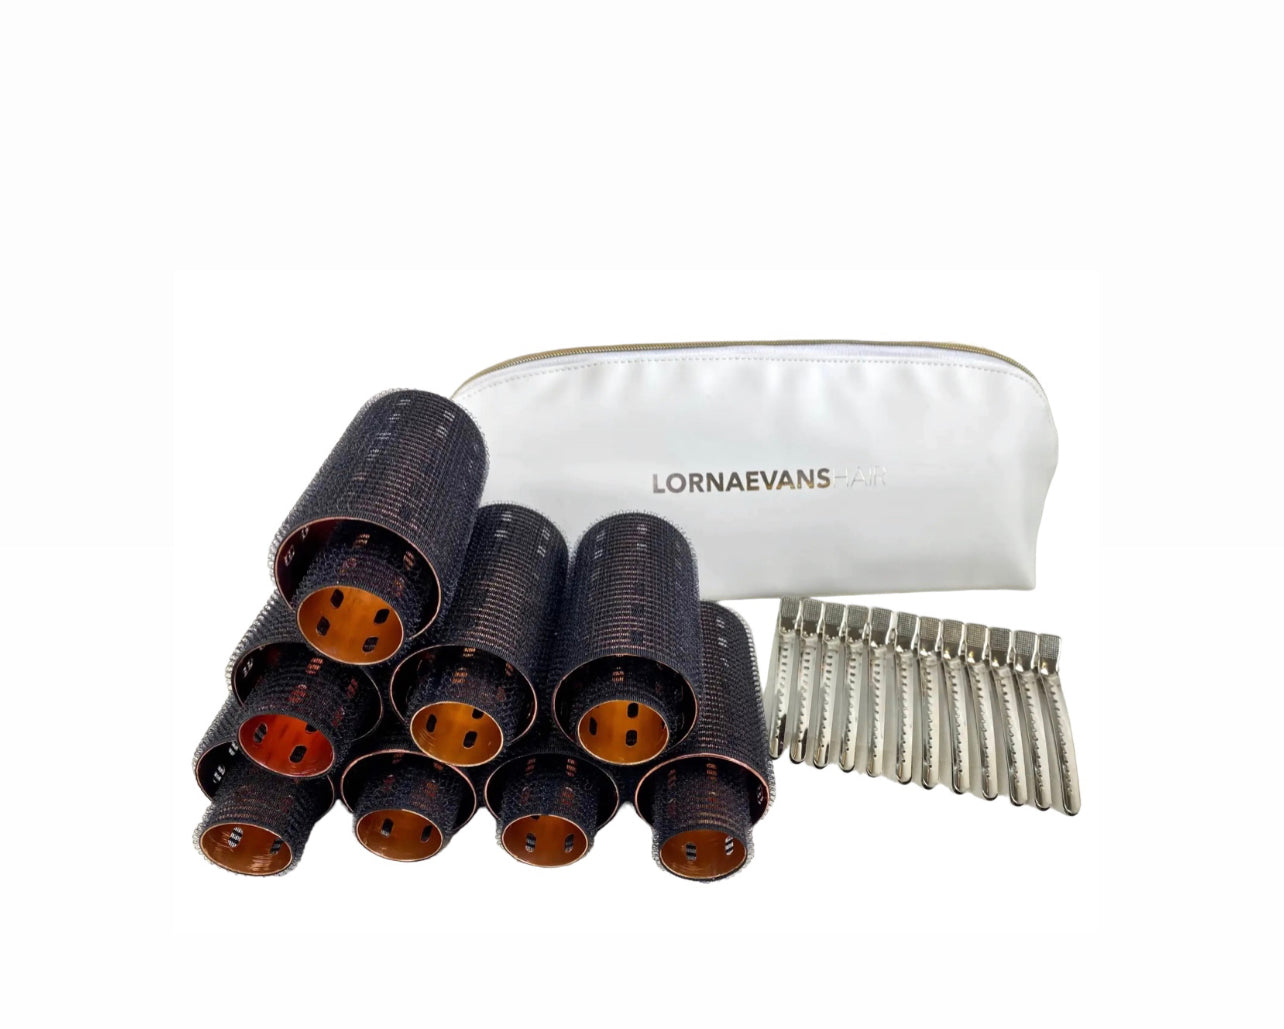 NEW Lorna Evans Velcro Aluminum Self Grip Rollers 90mm - Black Rose Gold Large Set x 8 + 8 small Velcro rollers + 12 extra long duck bill clips + deluxe carry bag Rockhampton Vintage Hire